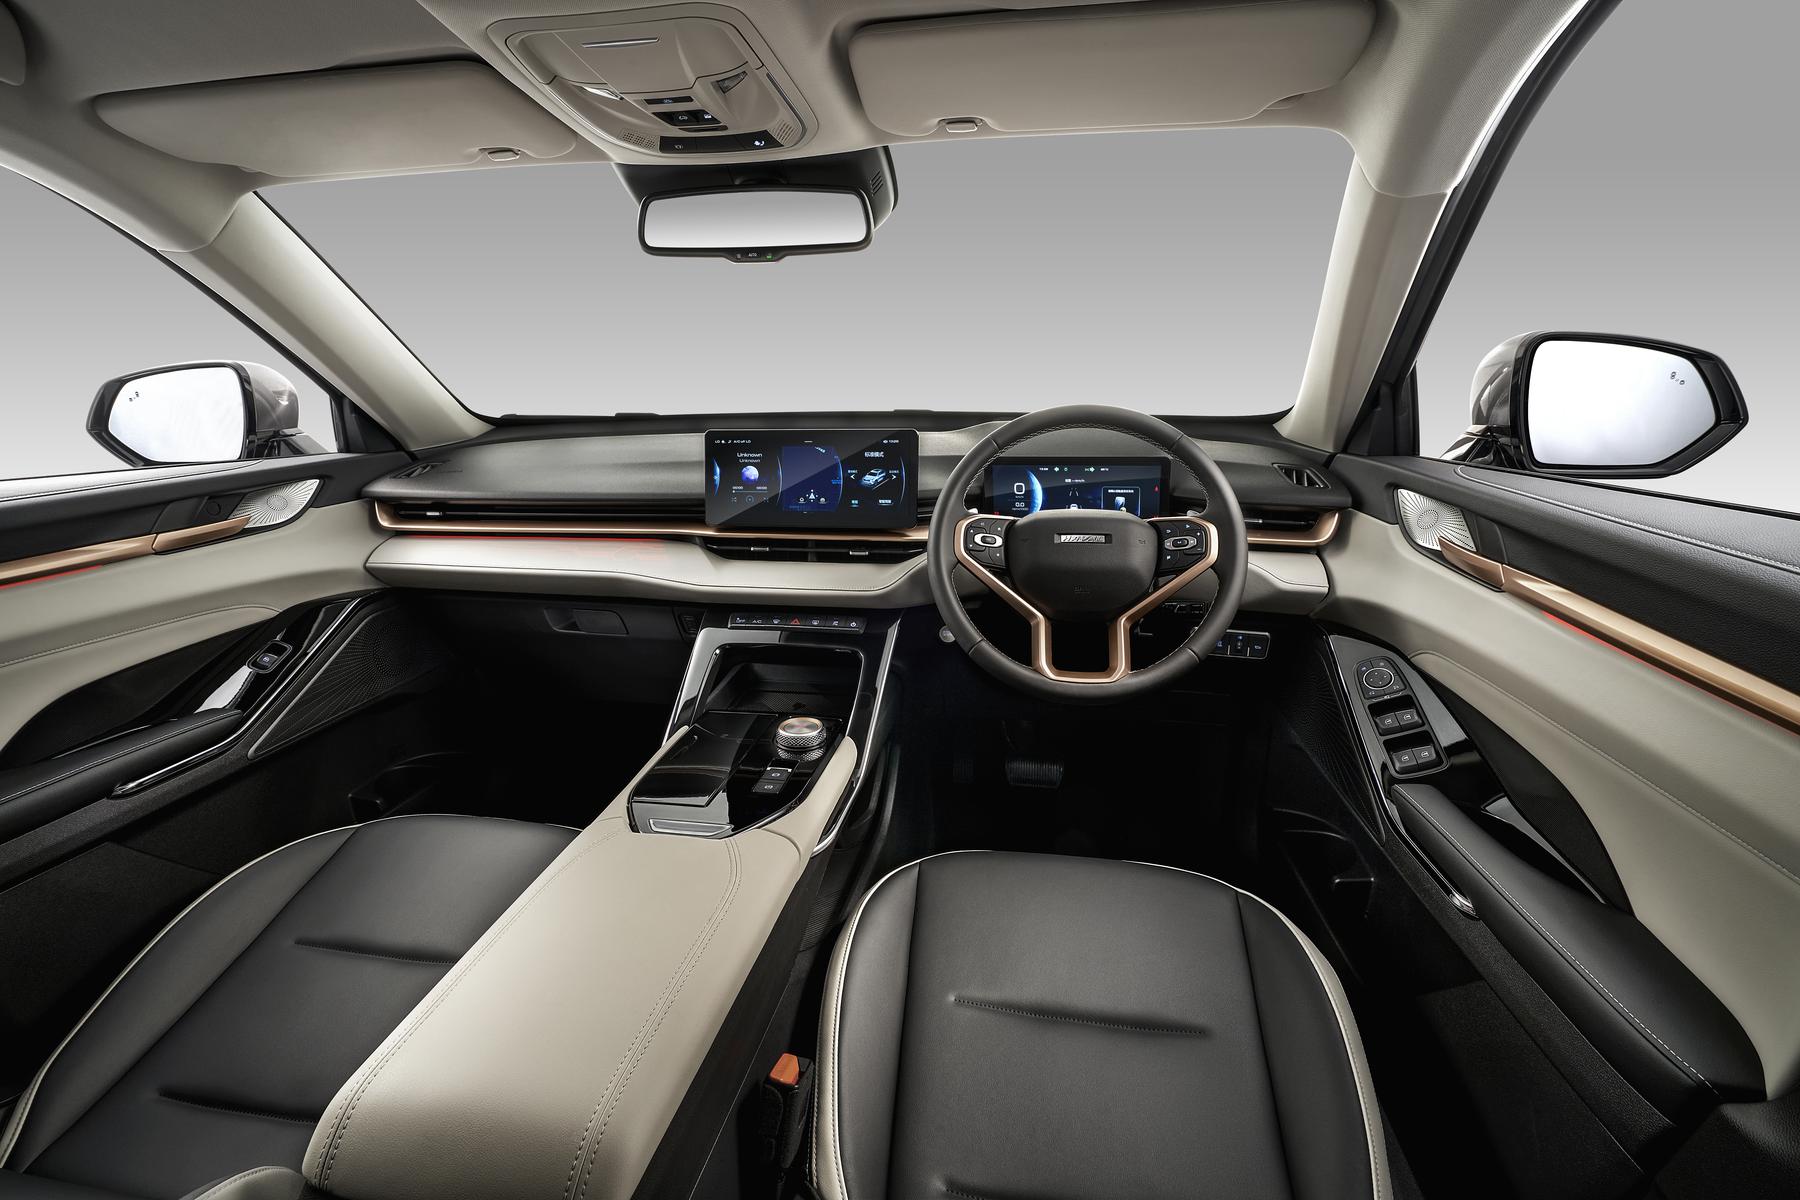 The new Haval H6 Interior